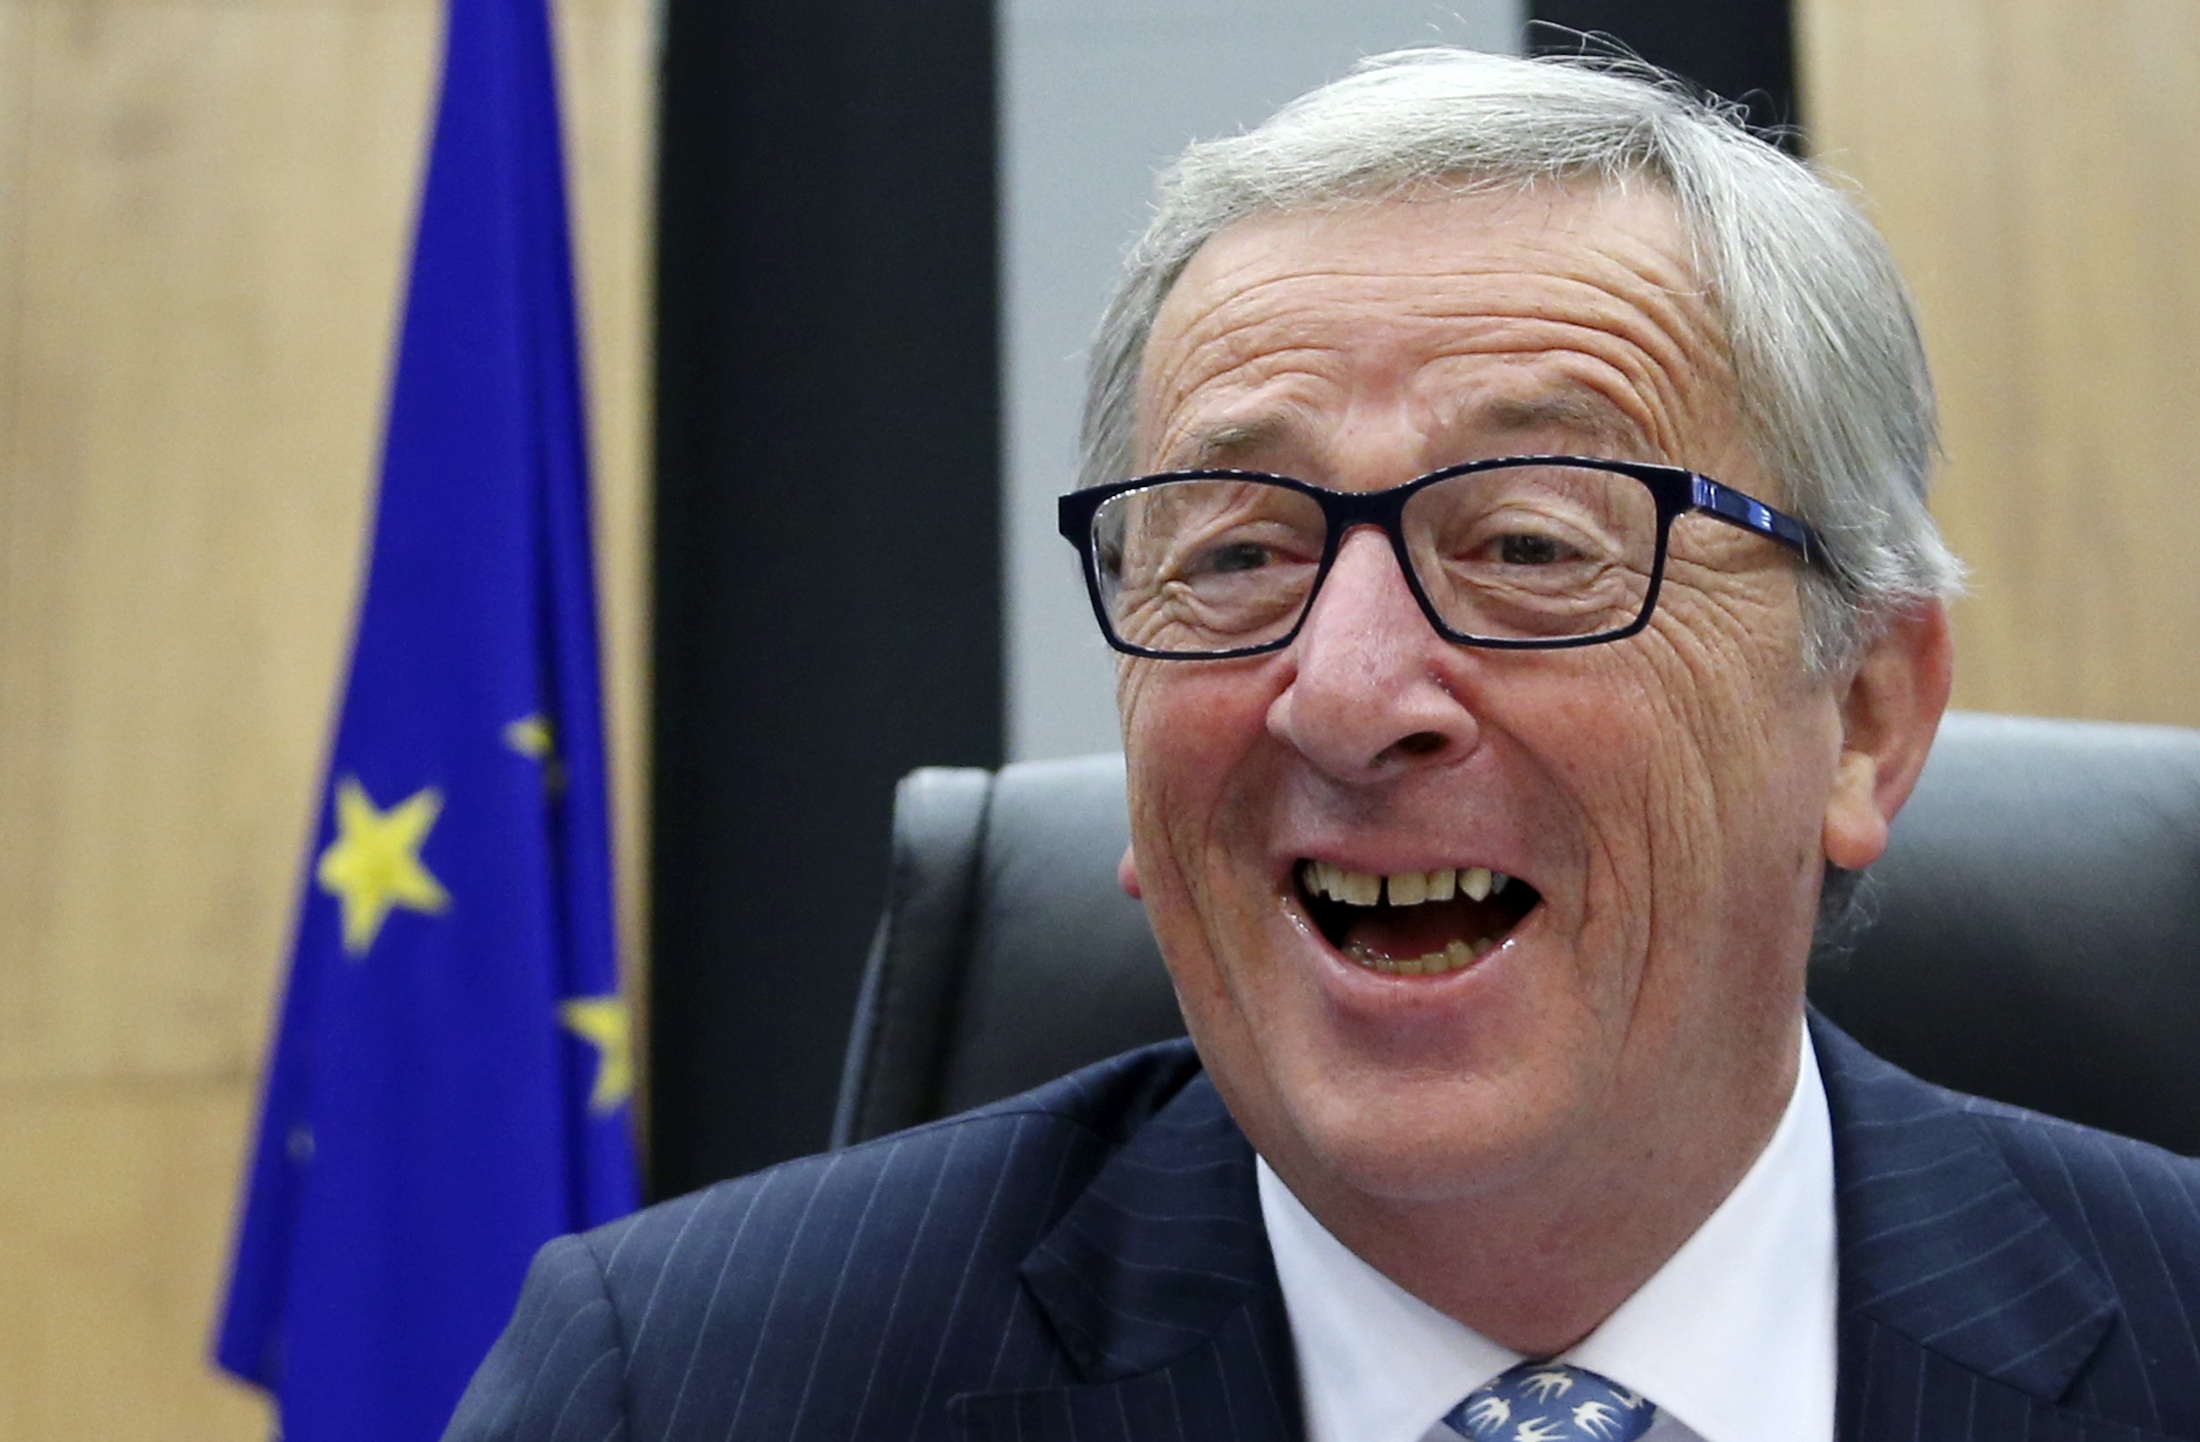 The European Commission's new President Juncker reacts as he chairs the first official meeting of the EU's executive body in Brussels